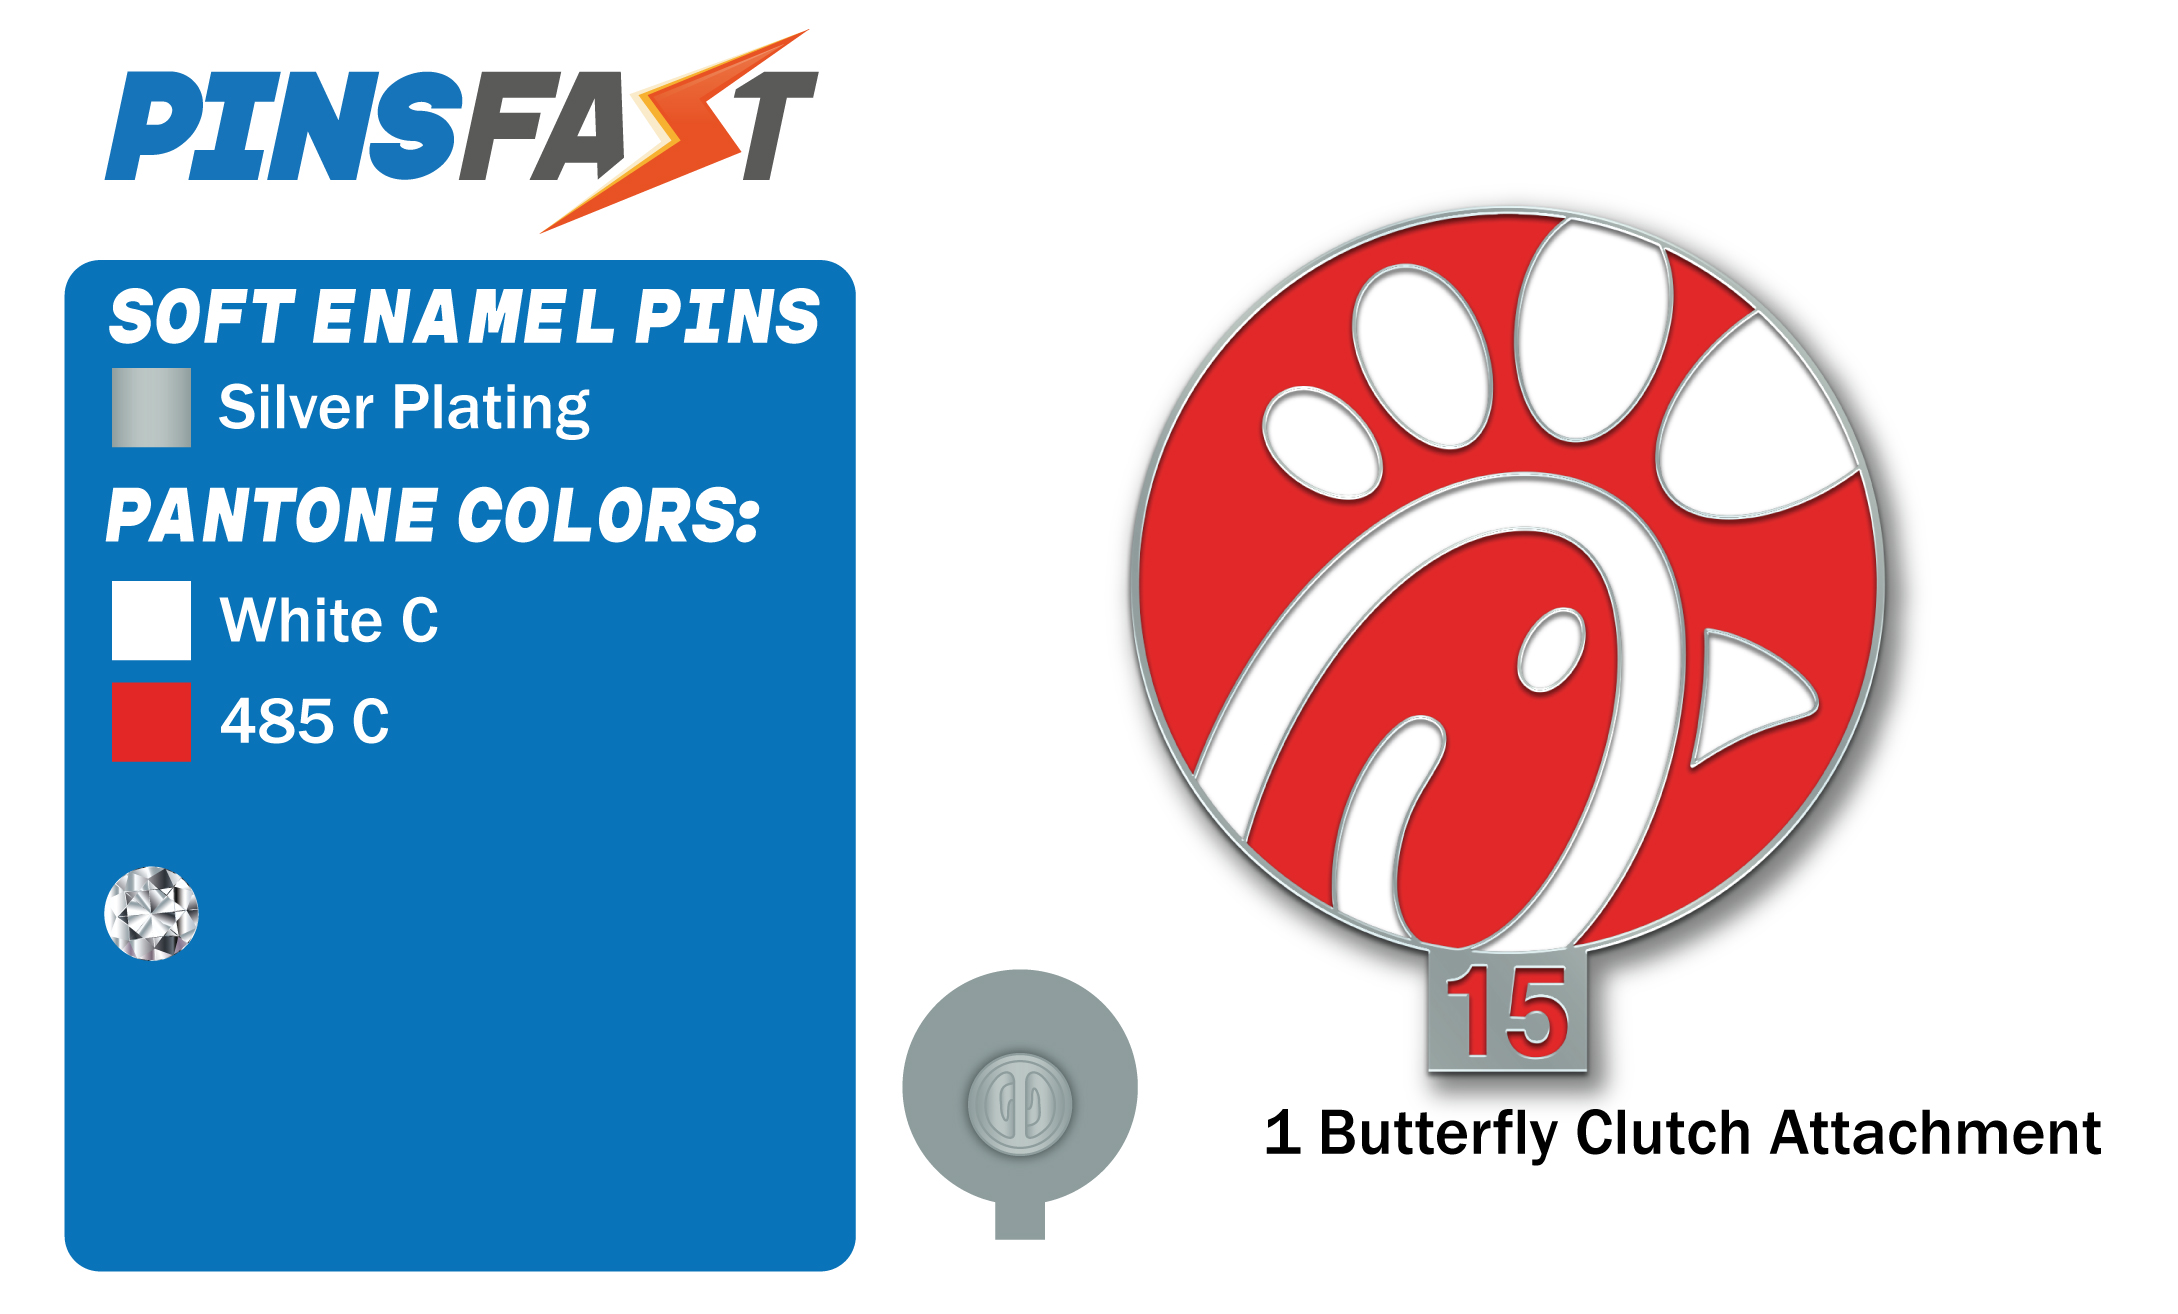 Soft Enamel Pins for Chick-Fil-A